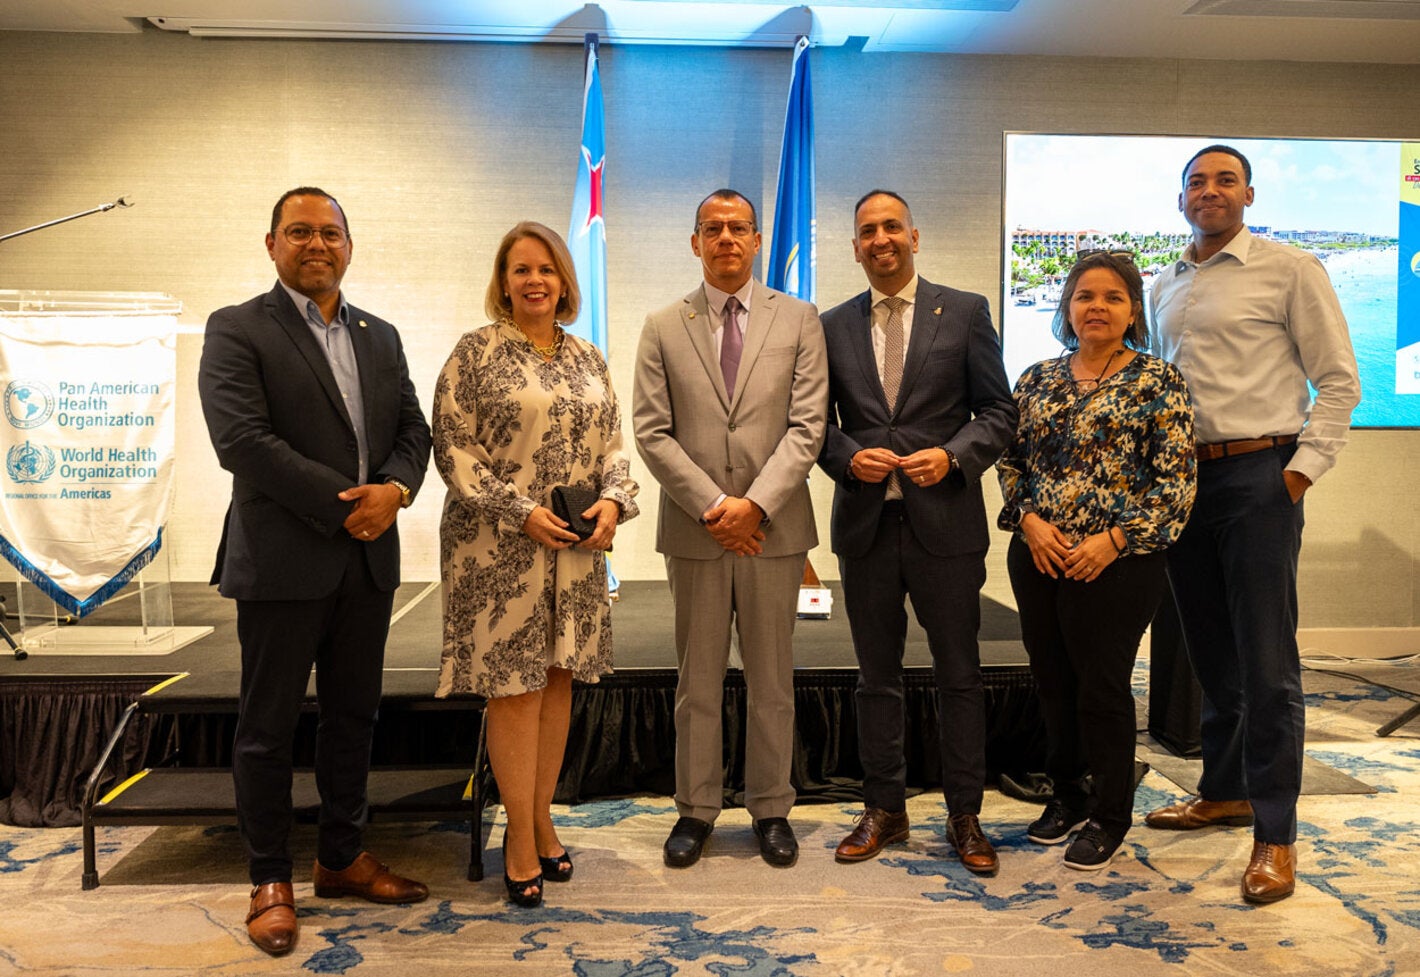 (at centre from L to R) Prime Minister of Aruba, Her Excellency Evelyn Wever-Croes, PAHO/WHO Representative for Trinidad and Tobago and the Dutch Caribbean Islands, Dr. Gabriel Vivas Francesconi and the Minister of Tourism and Health, Mr. Danguillaume P. Oduber.